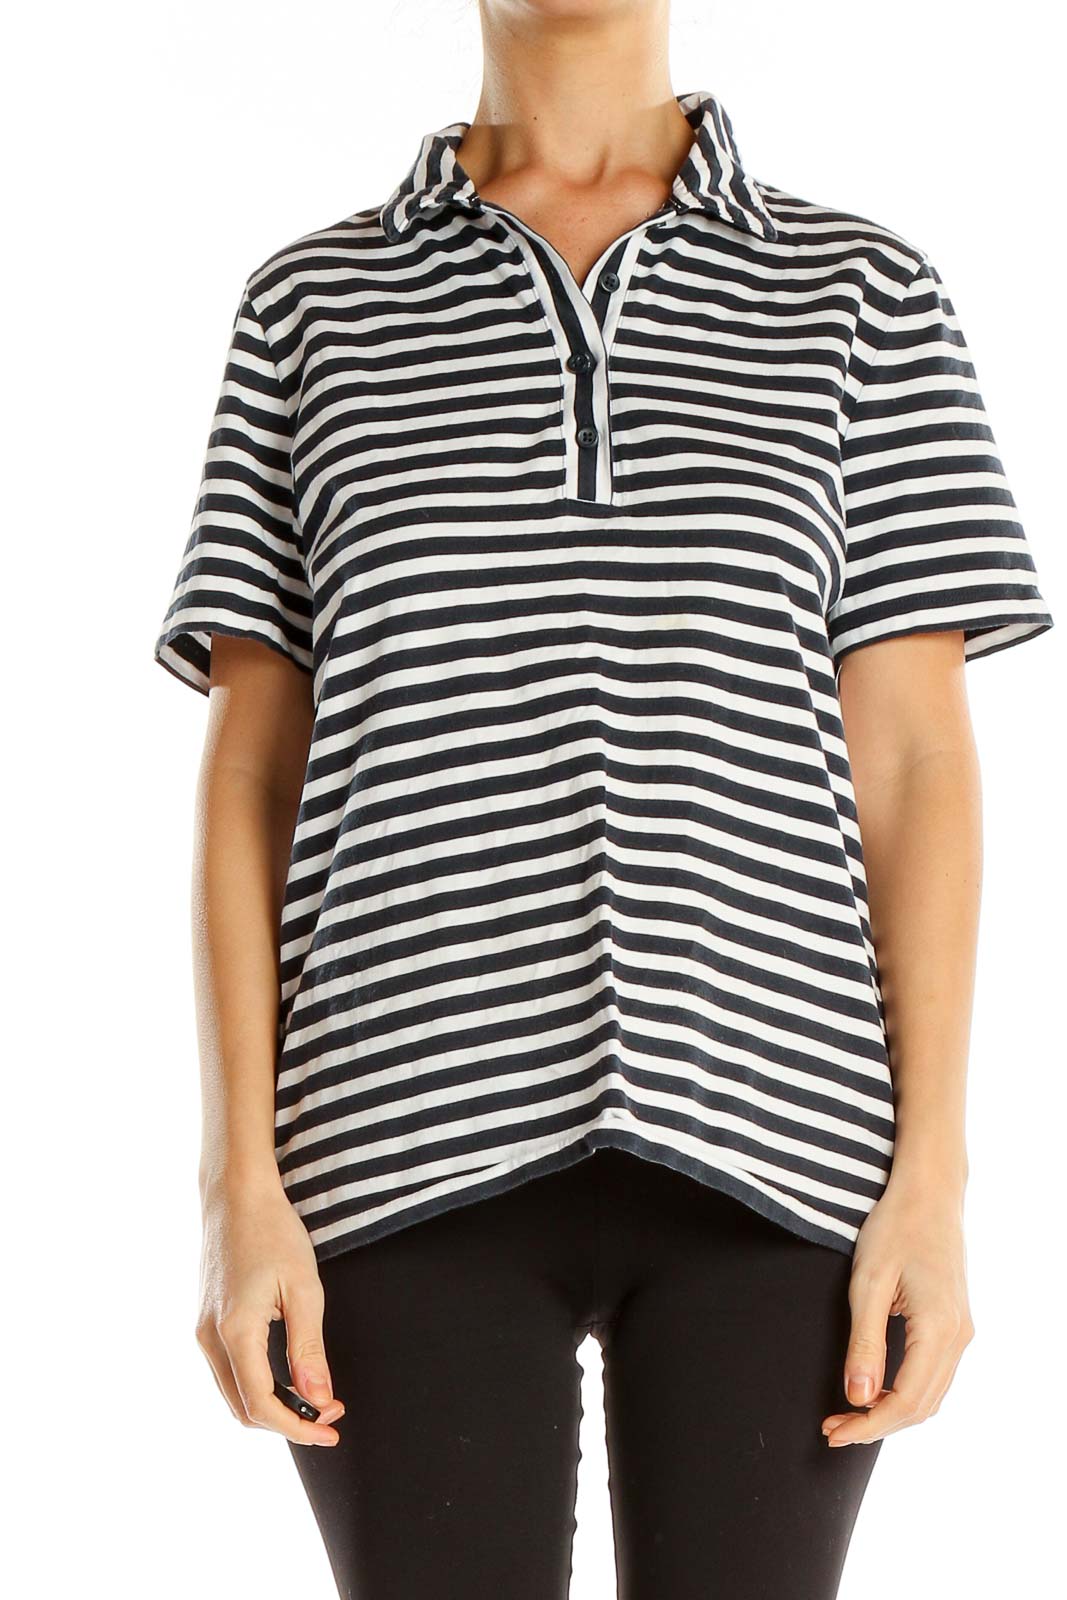 Black White Striped Casual Polo Shirt Front